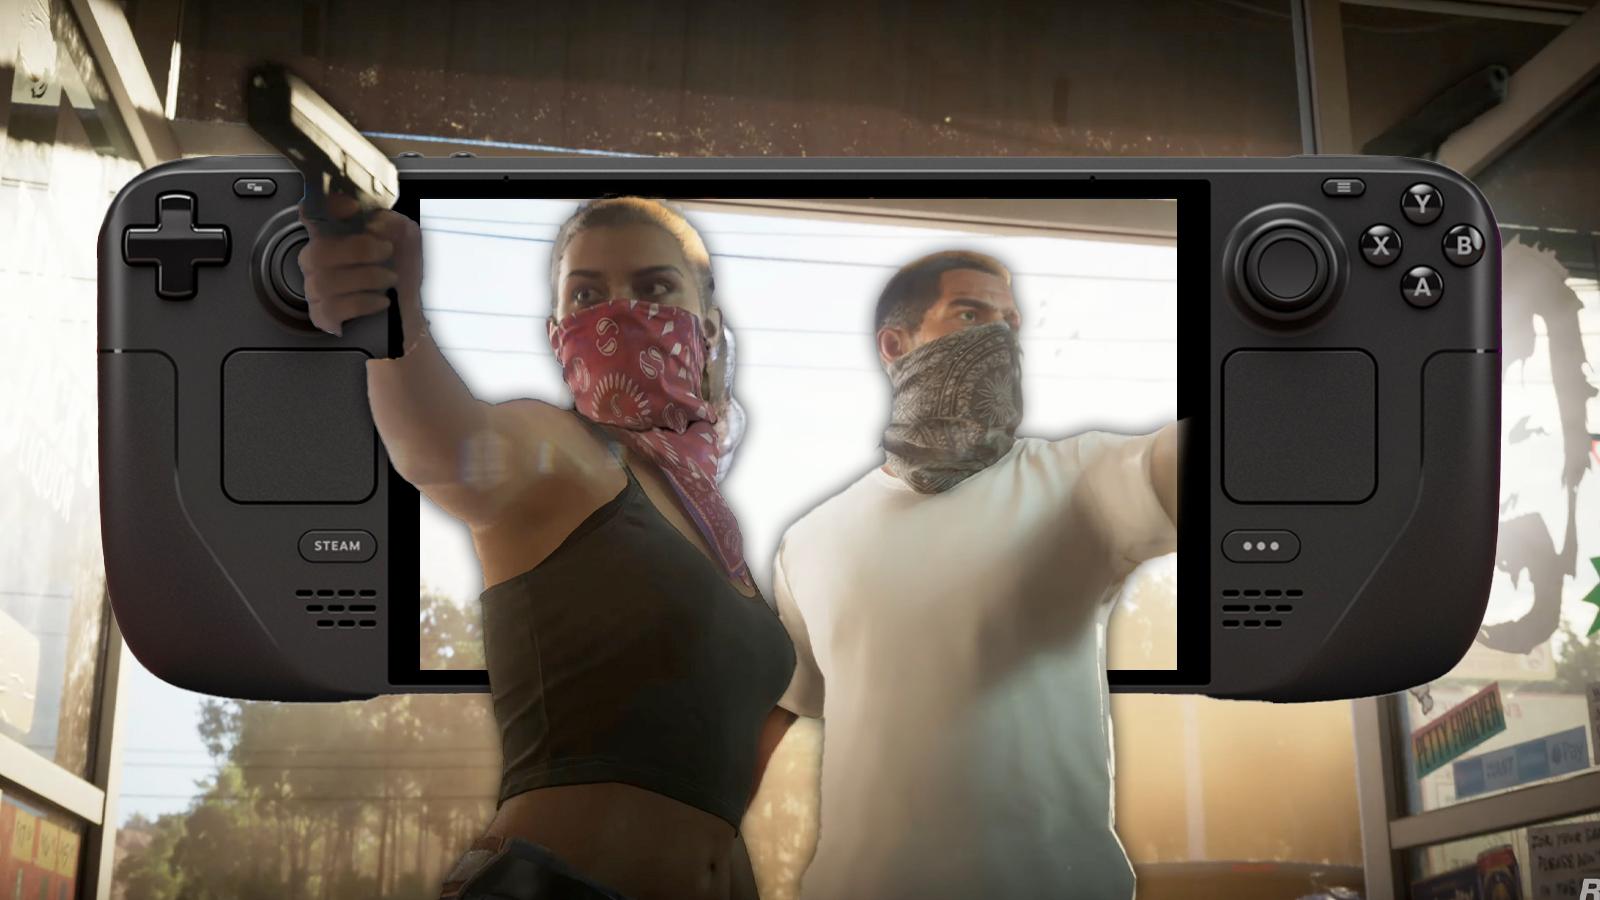 GTA 6 screenshot of two characters with guns with a steam deck oled overlayed